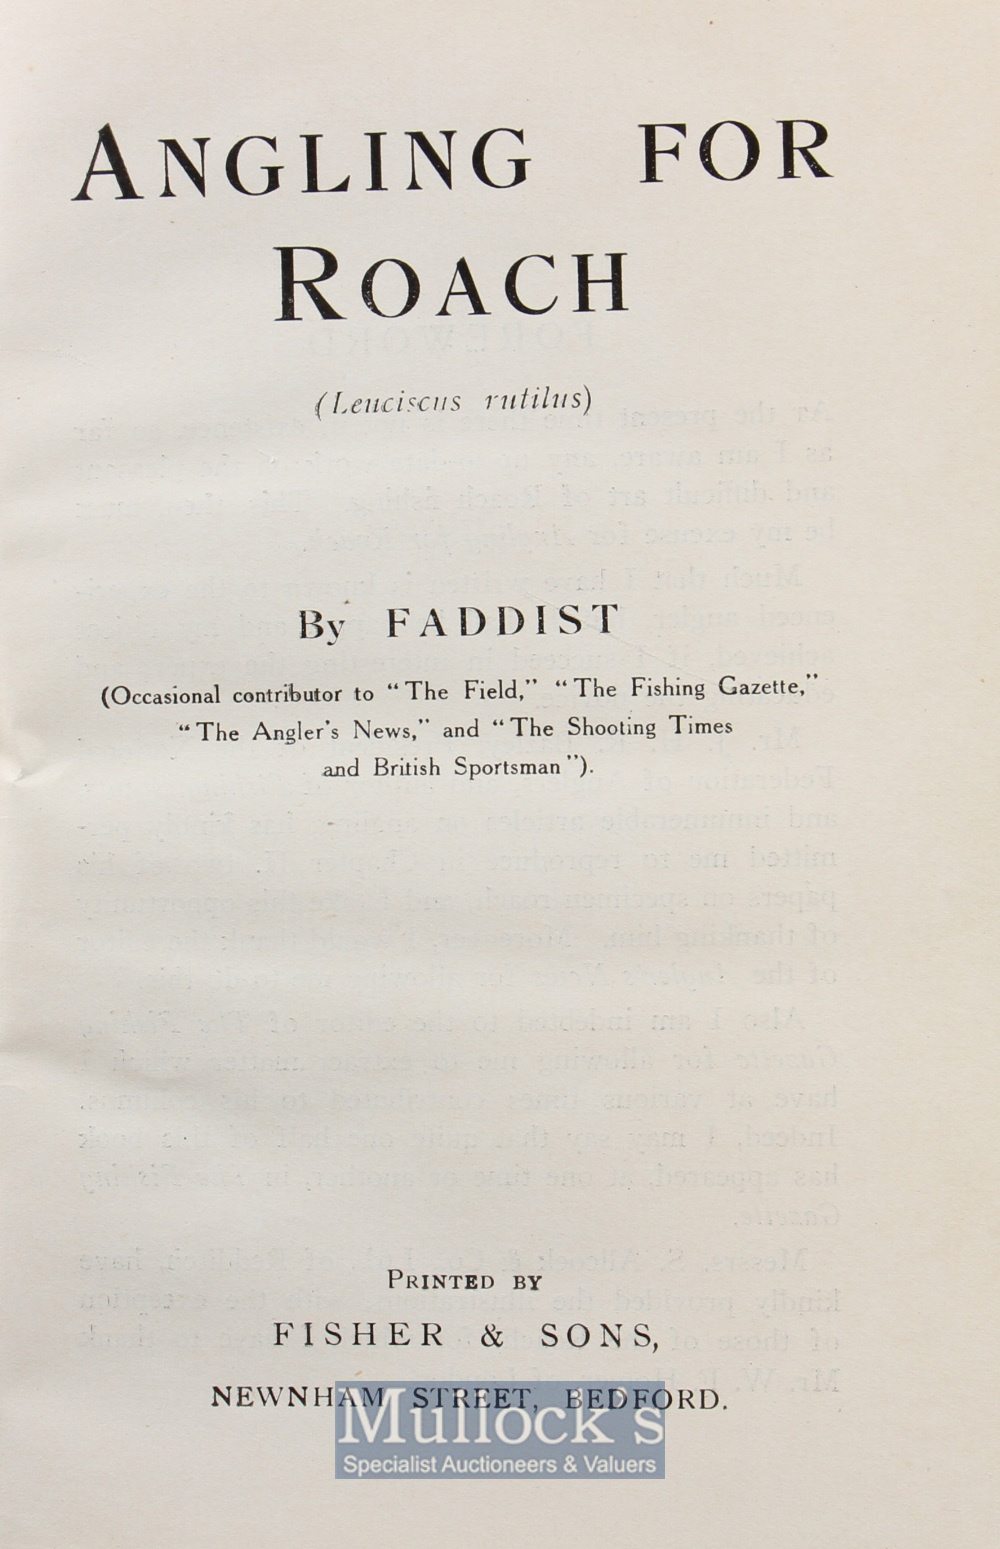 Faddist - 'Angling for Roach' printed by Fisher & Sons Bedford 1st ed binding little worn - Image 2 of 2